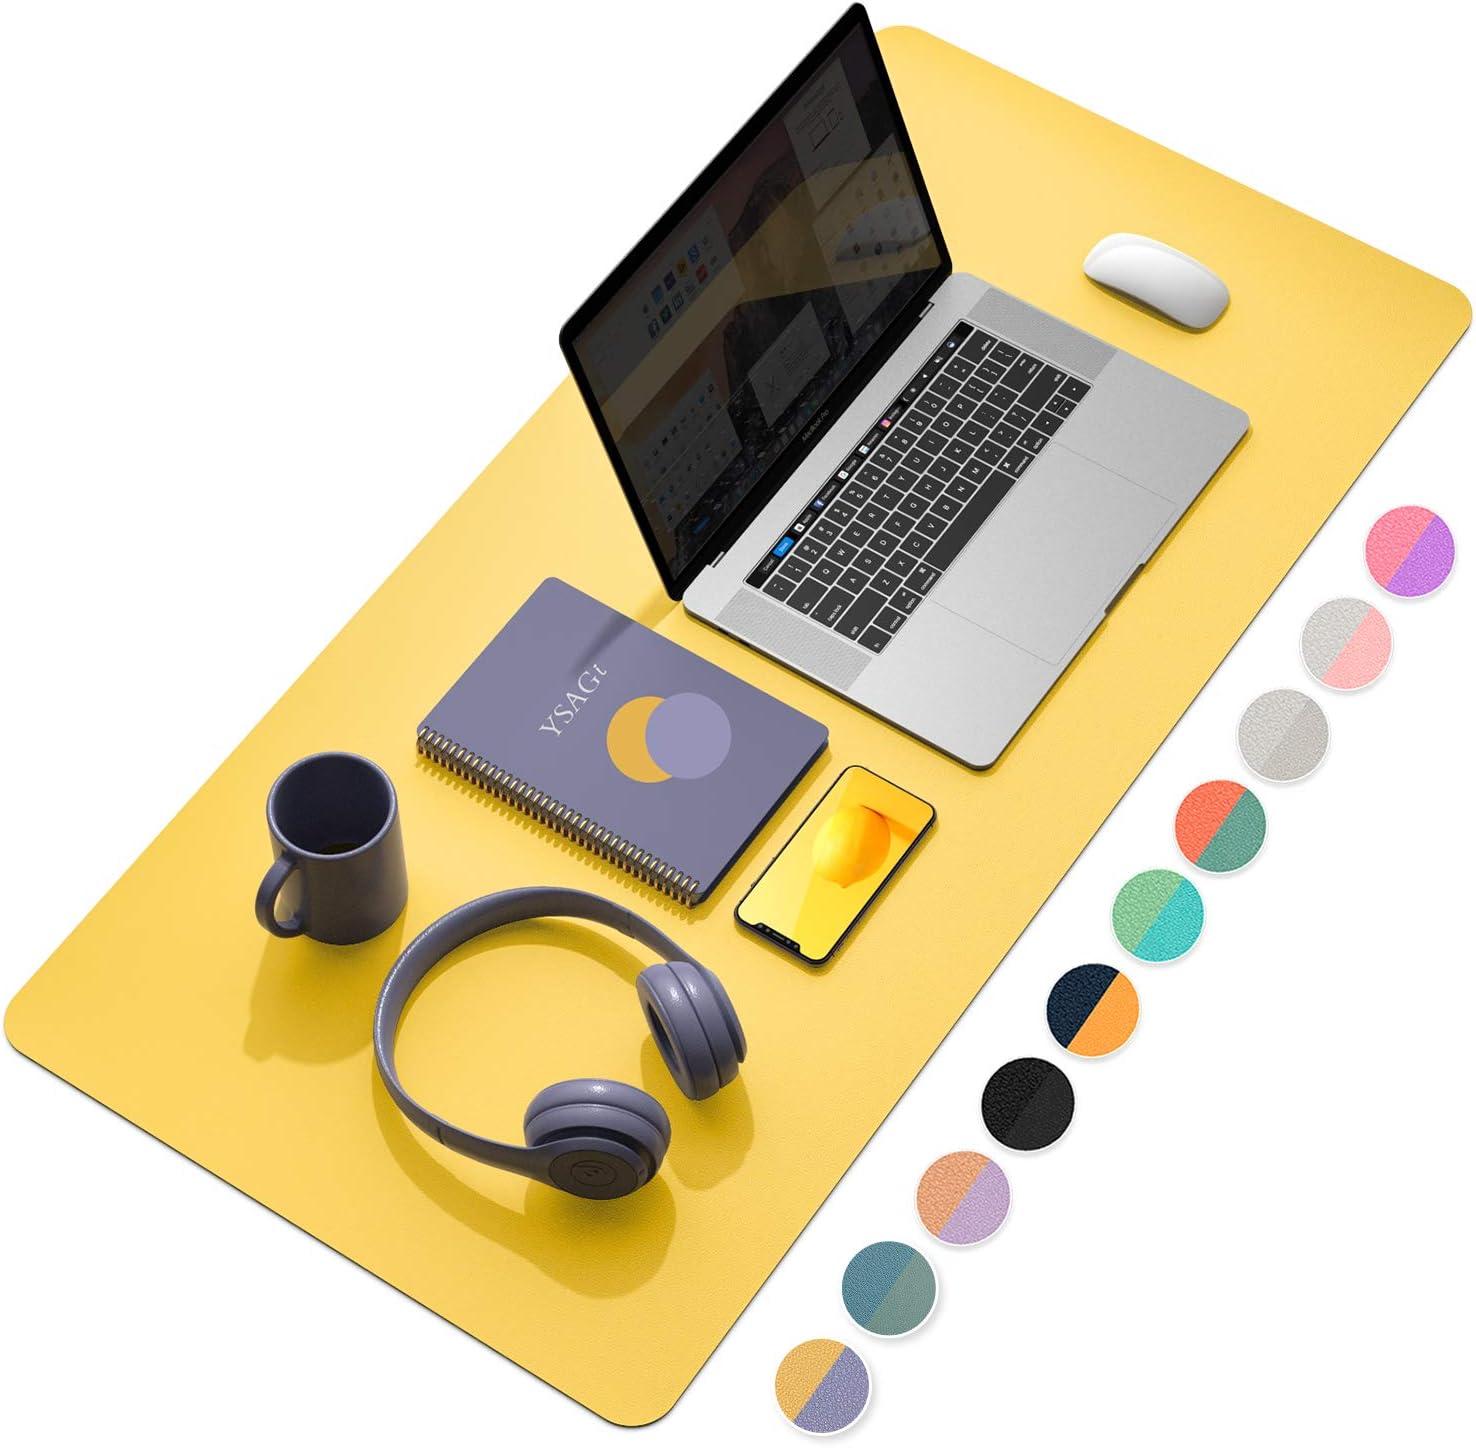 YSAGi Desk Mat, Mouse Pad,Waterproof Desk Pad,Large Mouse pad for Desk, Leather Desk Pad Large for Keyboard and Mouse,Dual-Sided Mouse Mat for Office and Home (35.4" x 17", Yellow + Taro Purple)